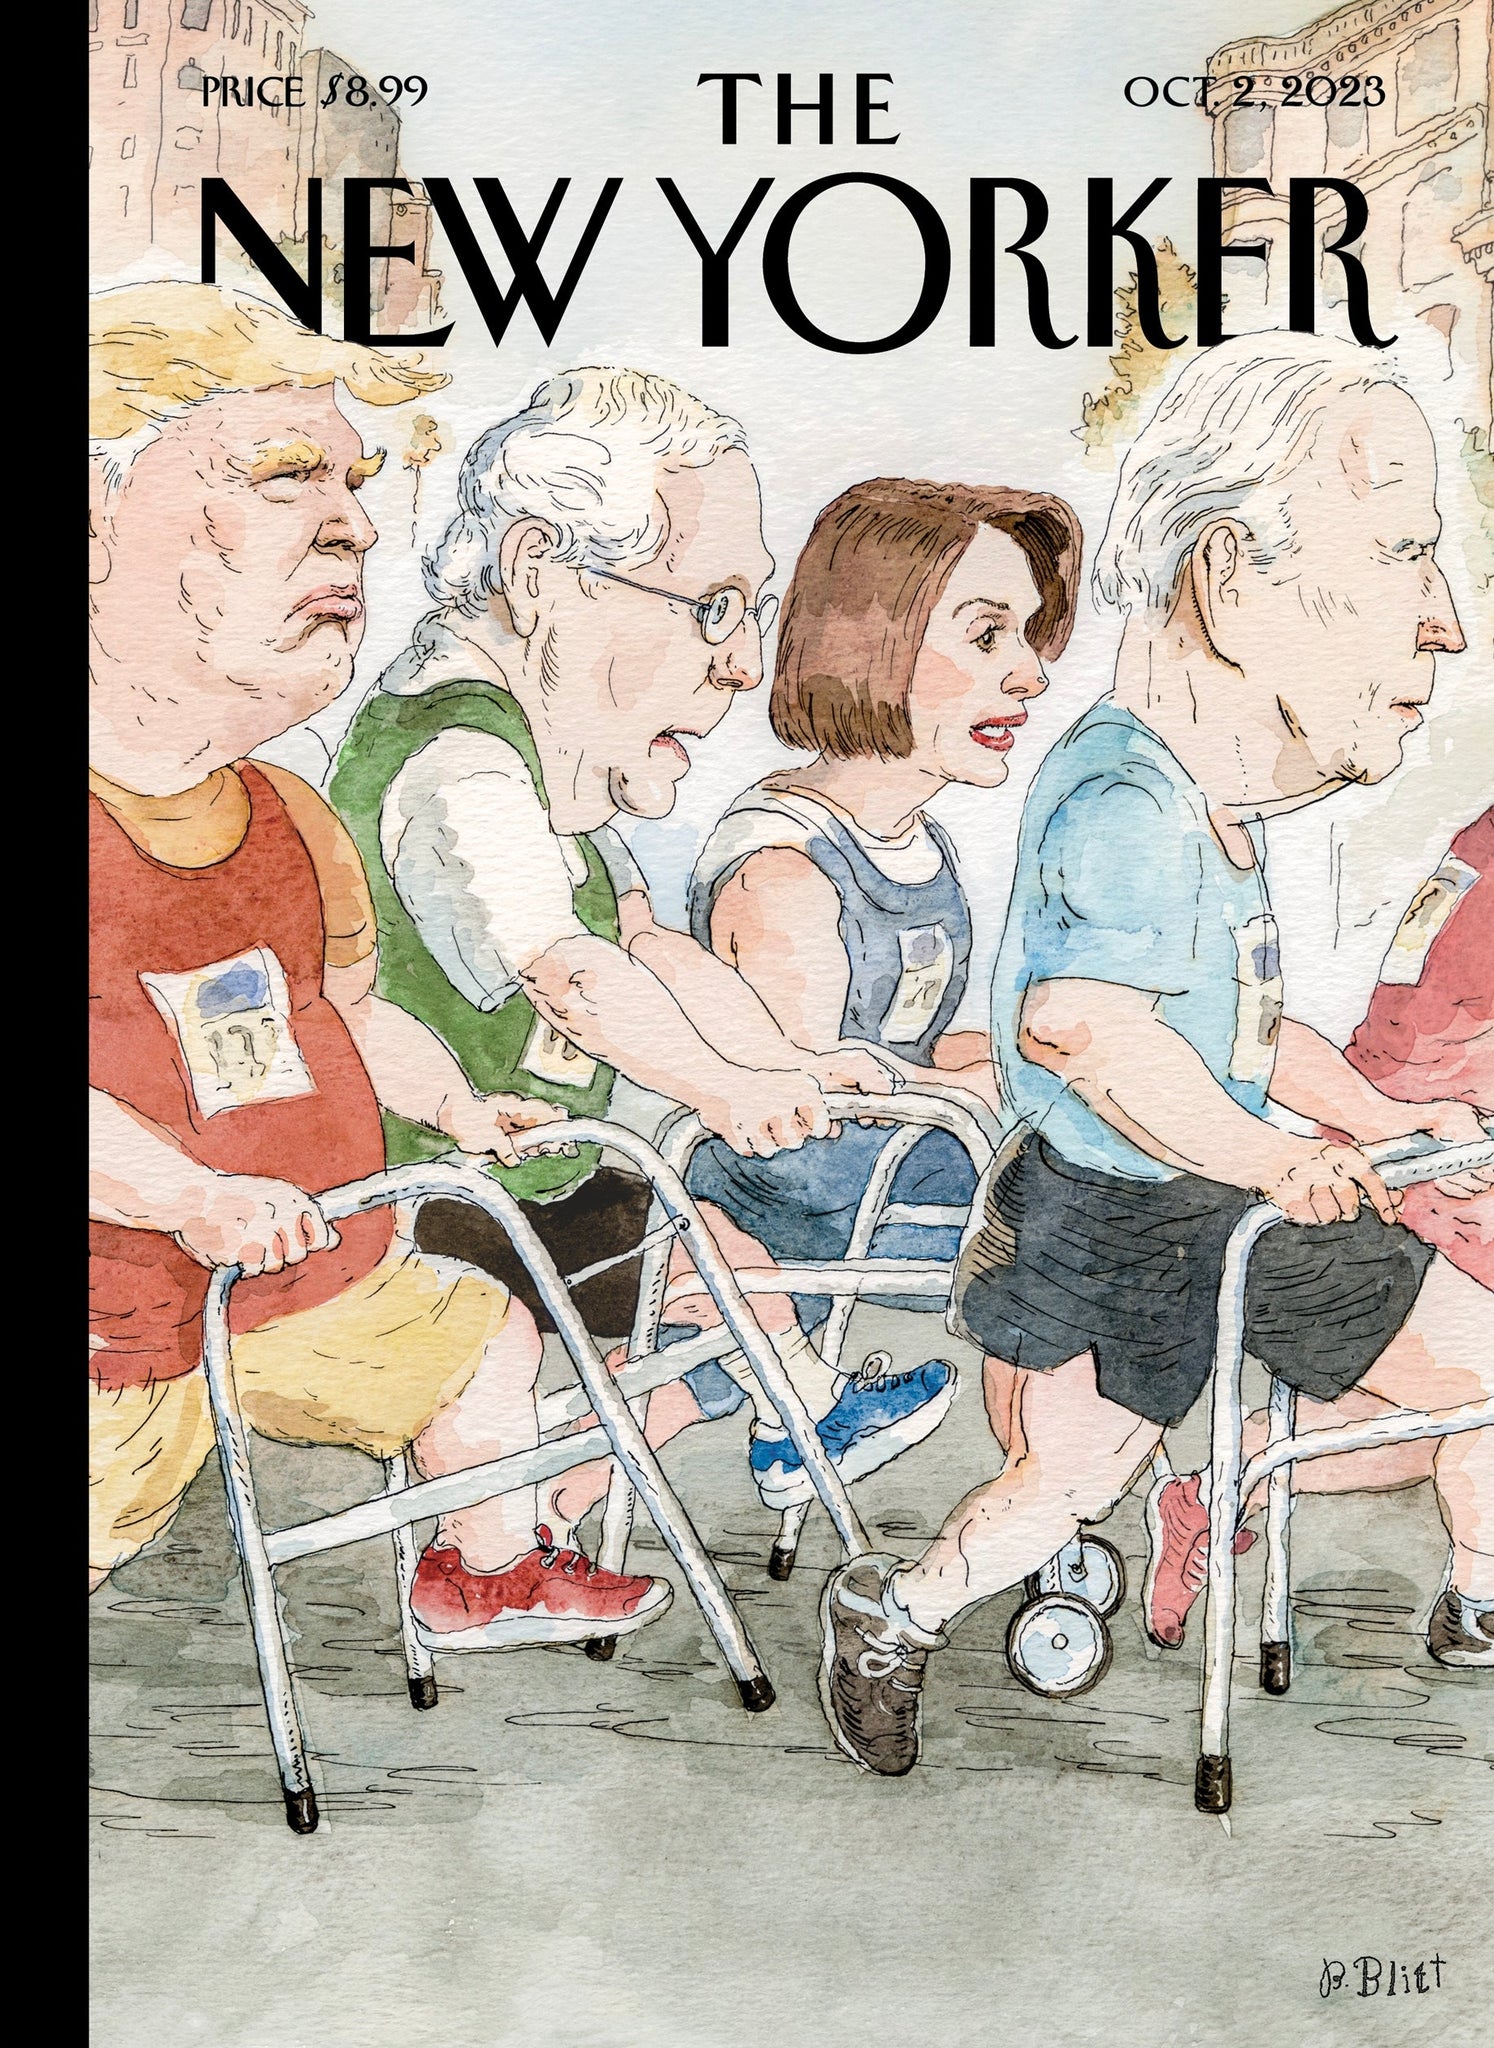 The New Yorker, October 2, 2023